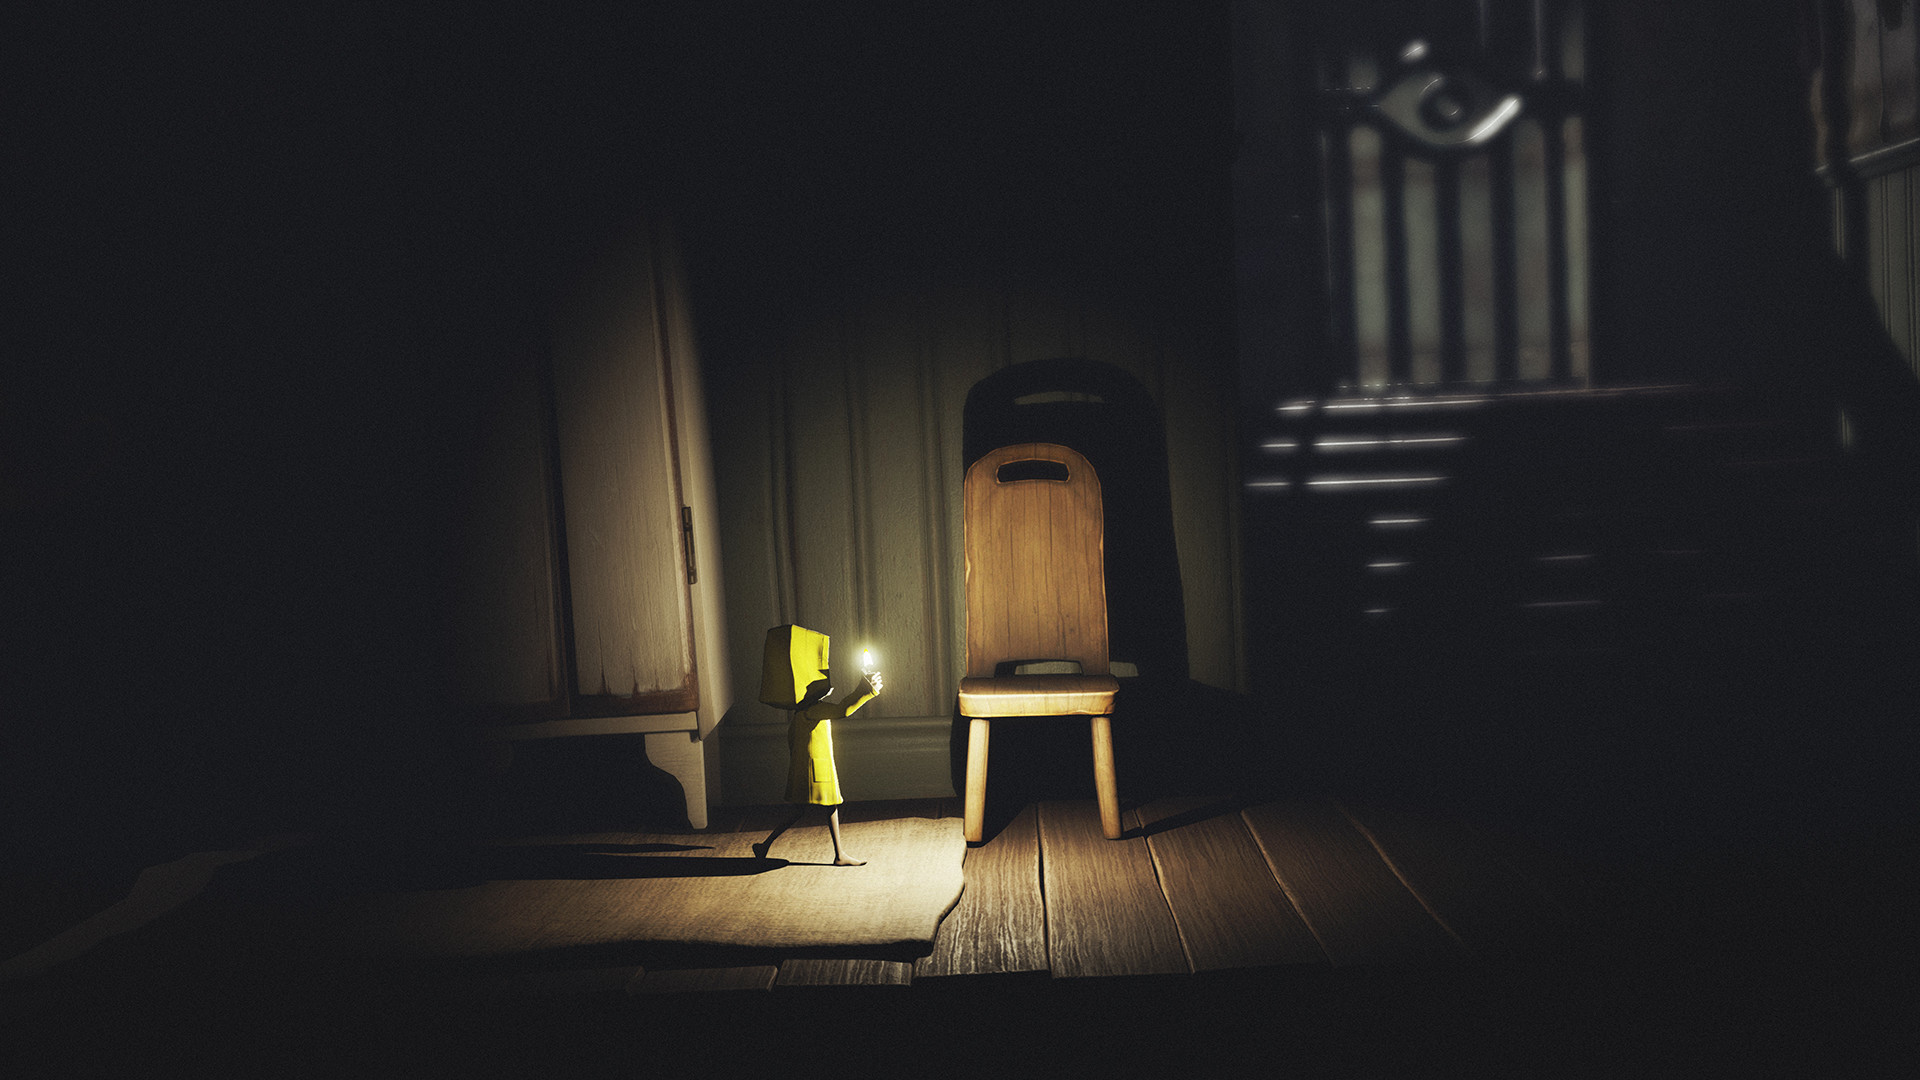 Little Nightmares is Free on Steam